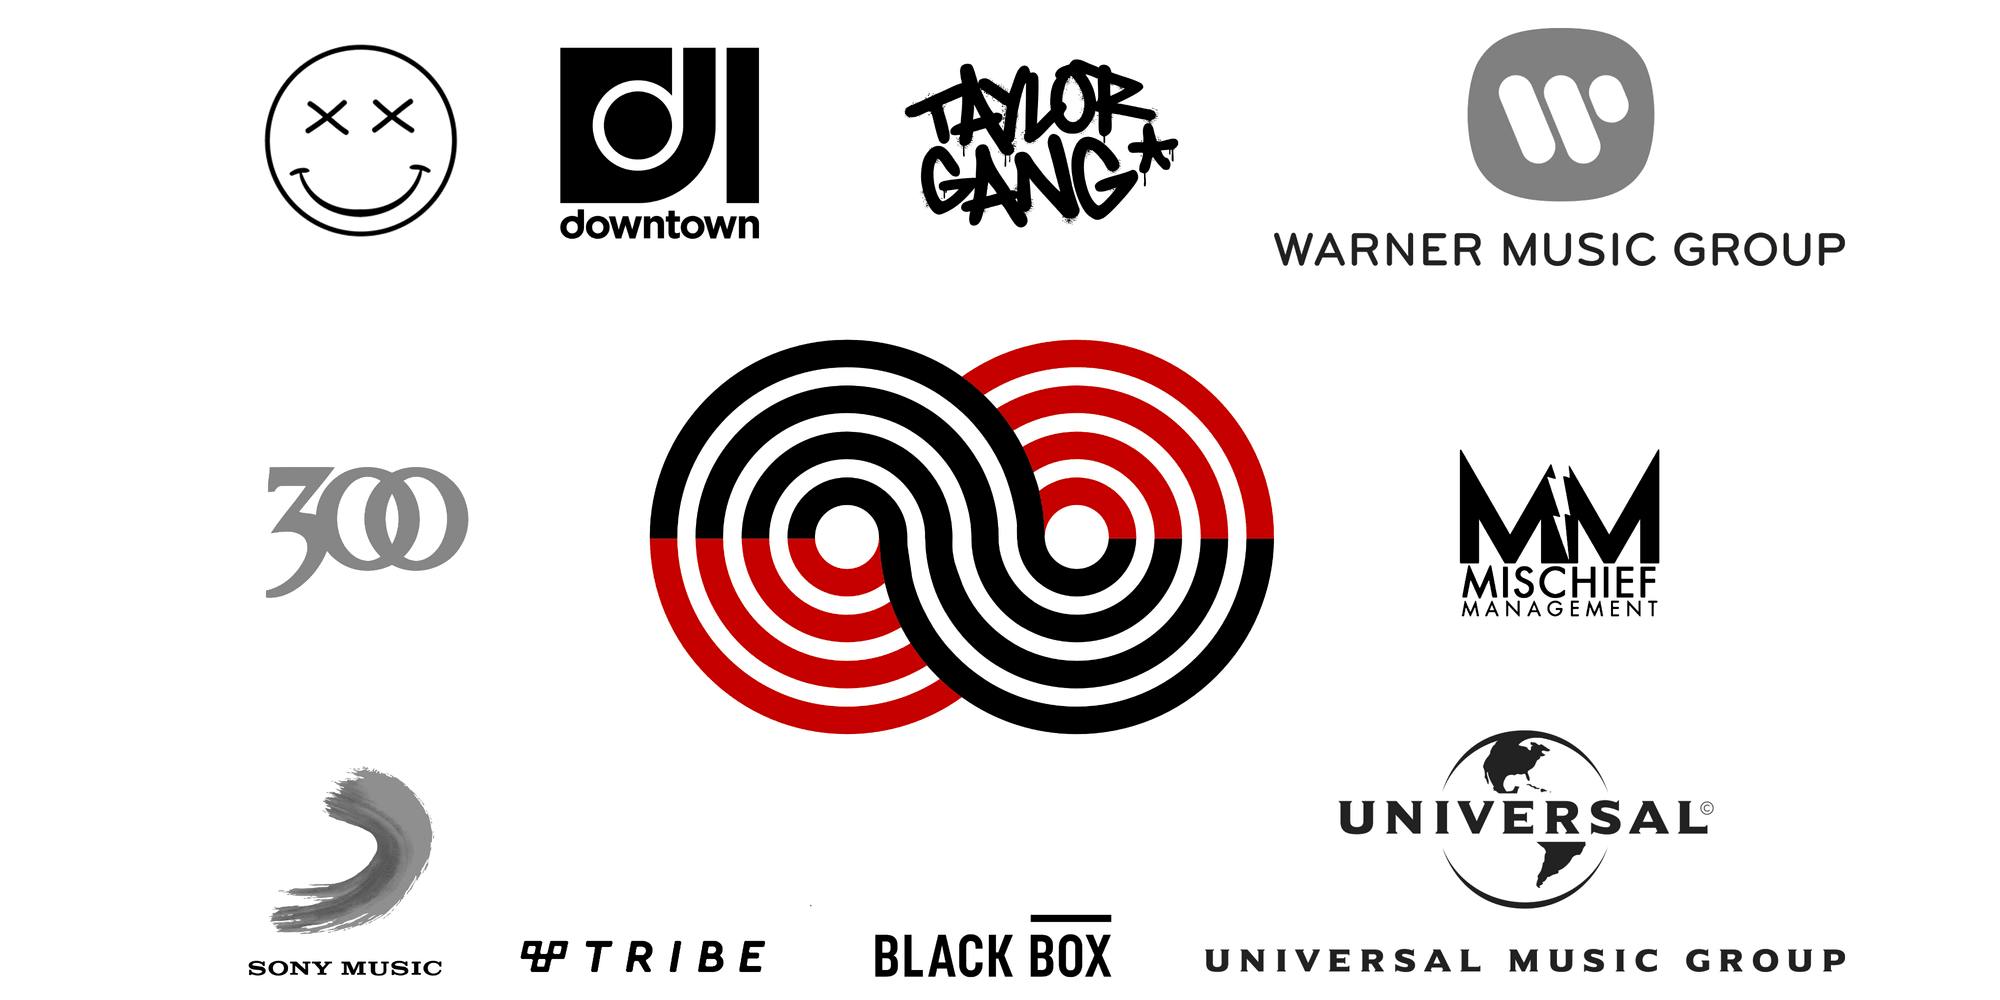 A graphic including logos of Universal Music Group, Warner Music Group, Downtown Records, Taylor Gang, Sony Music Group, and more.